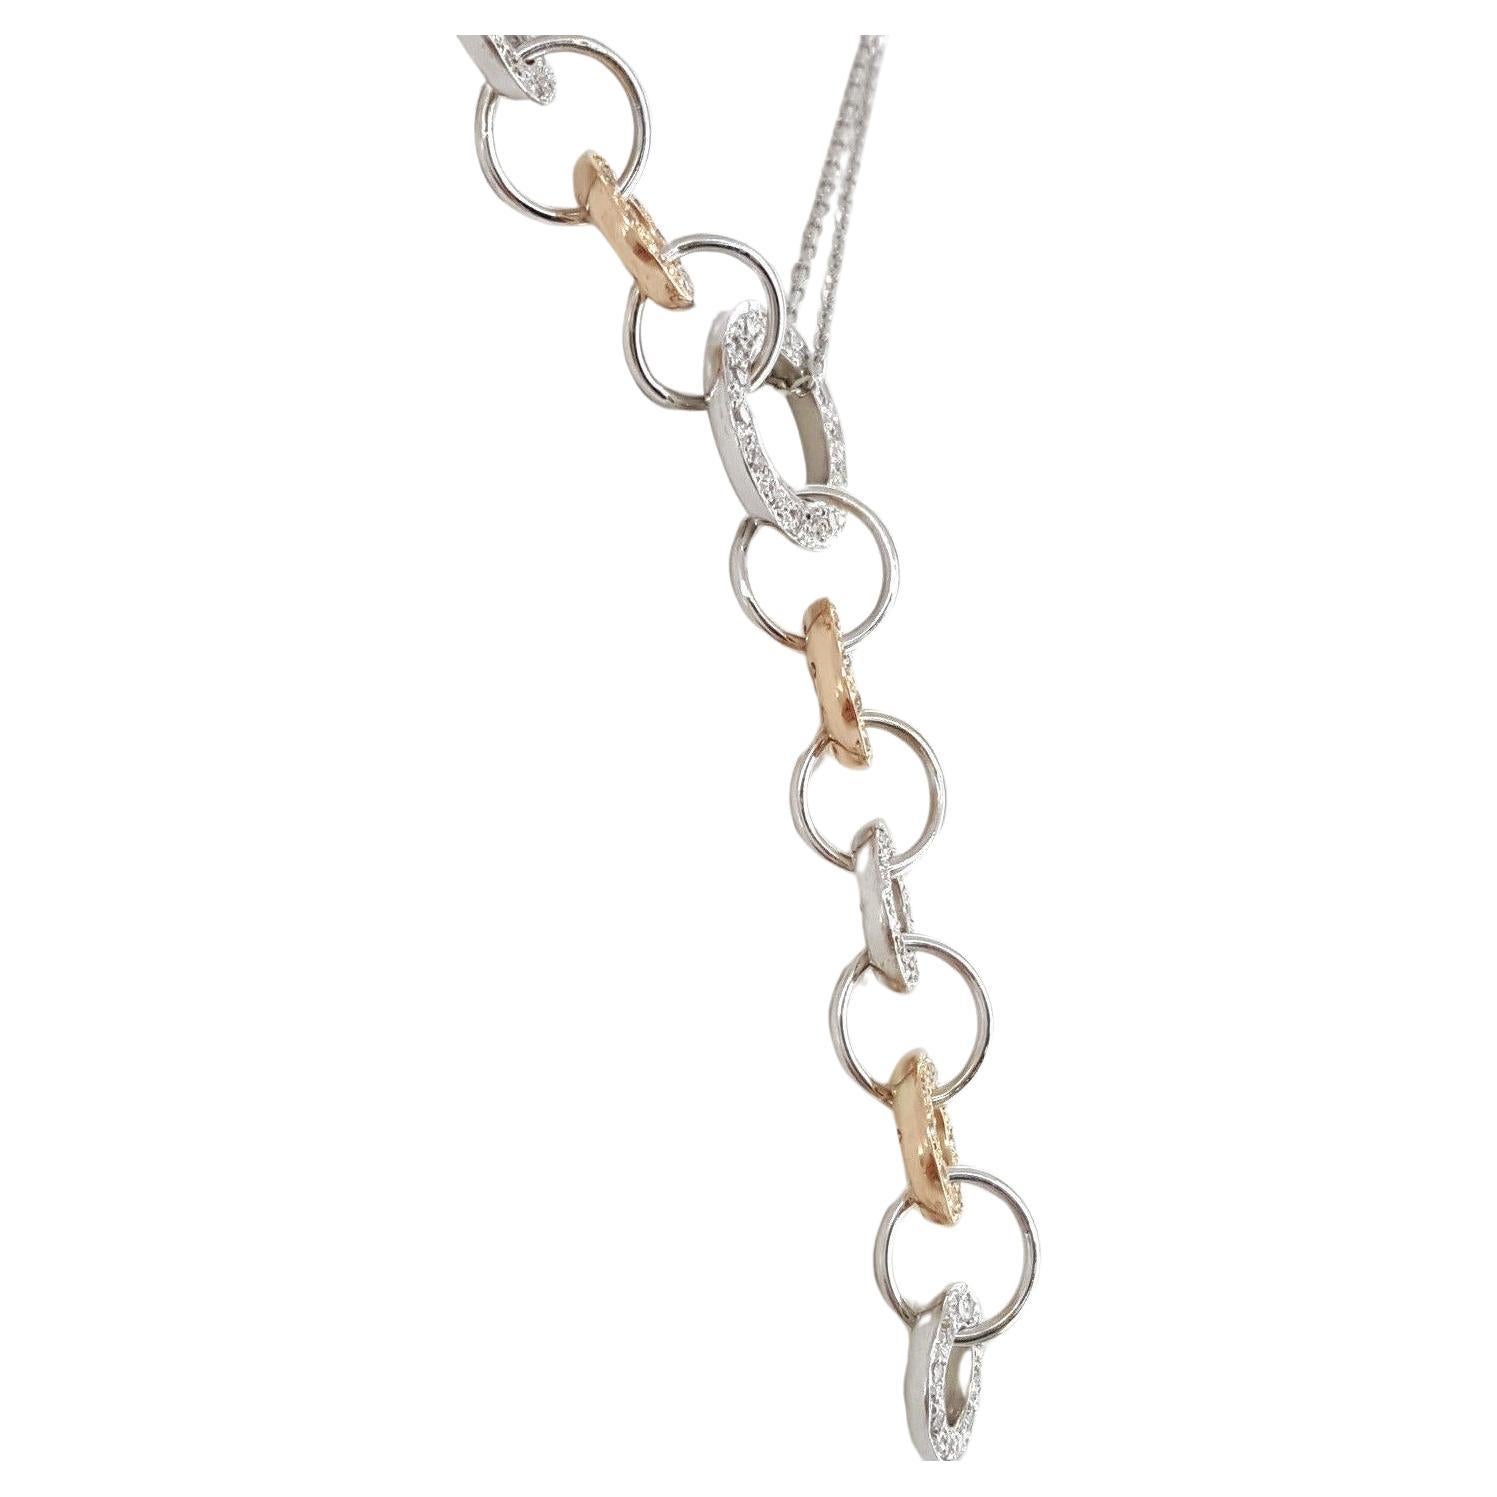 A Double Chain Necklace crafted in 18k White & Rose Gold features Overlapping Circles adorned with Round Brilliant Cut Diamonds. The necklace is adorned with 86 Natural Round Brilliant Cut diamonds, totaling around 0.75 carats, with H-I color and